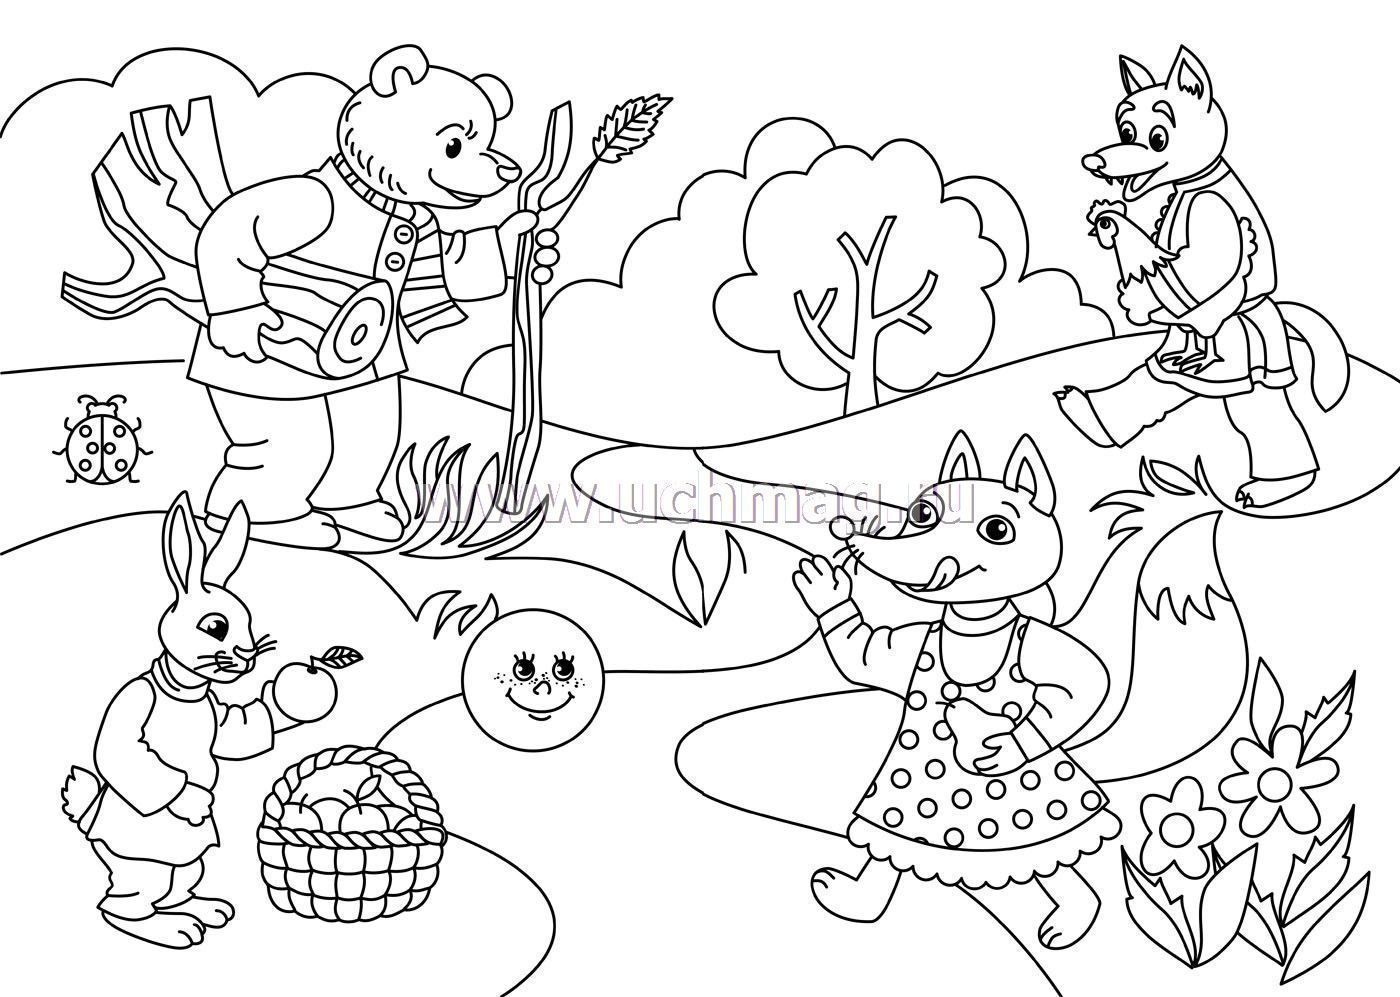 Fantastic fairy mitten coloring book for kids